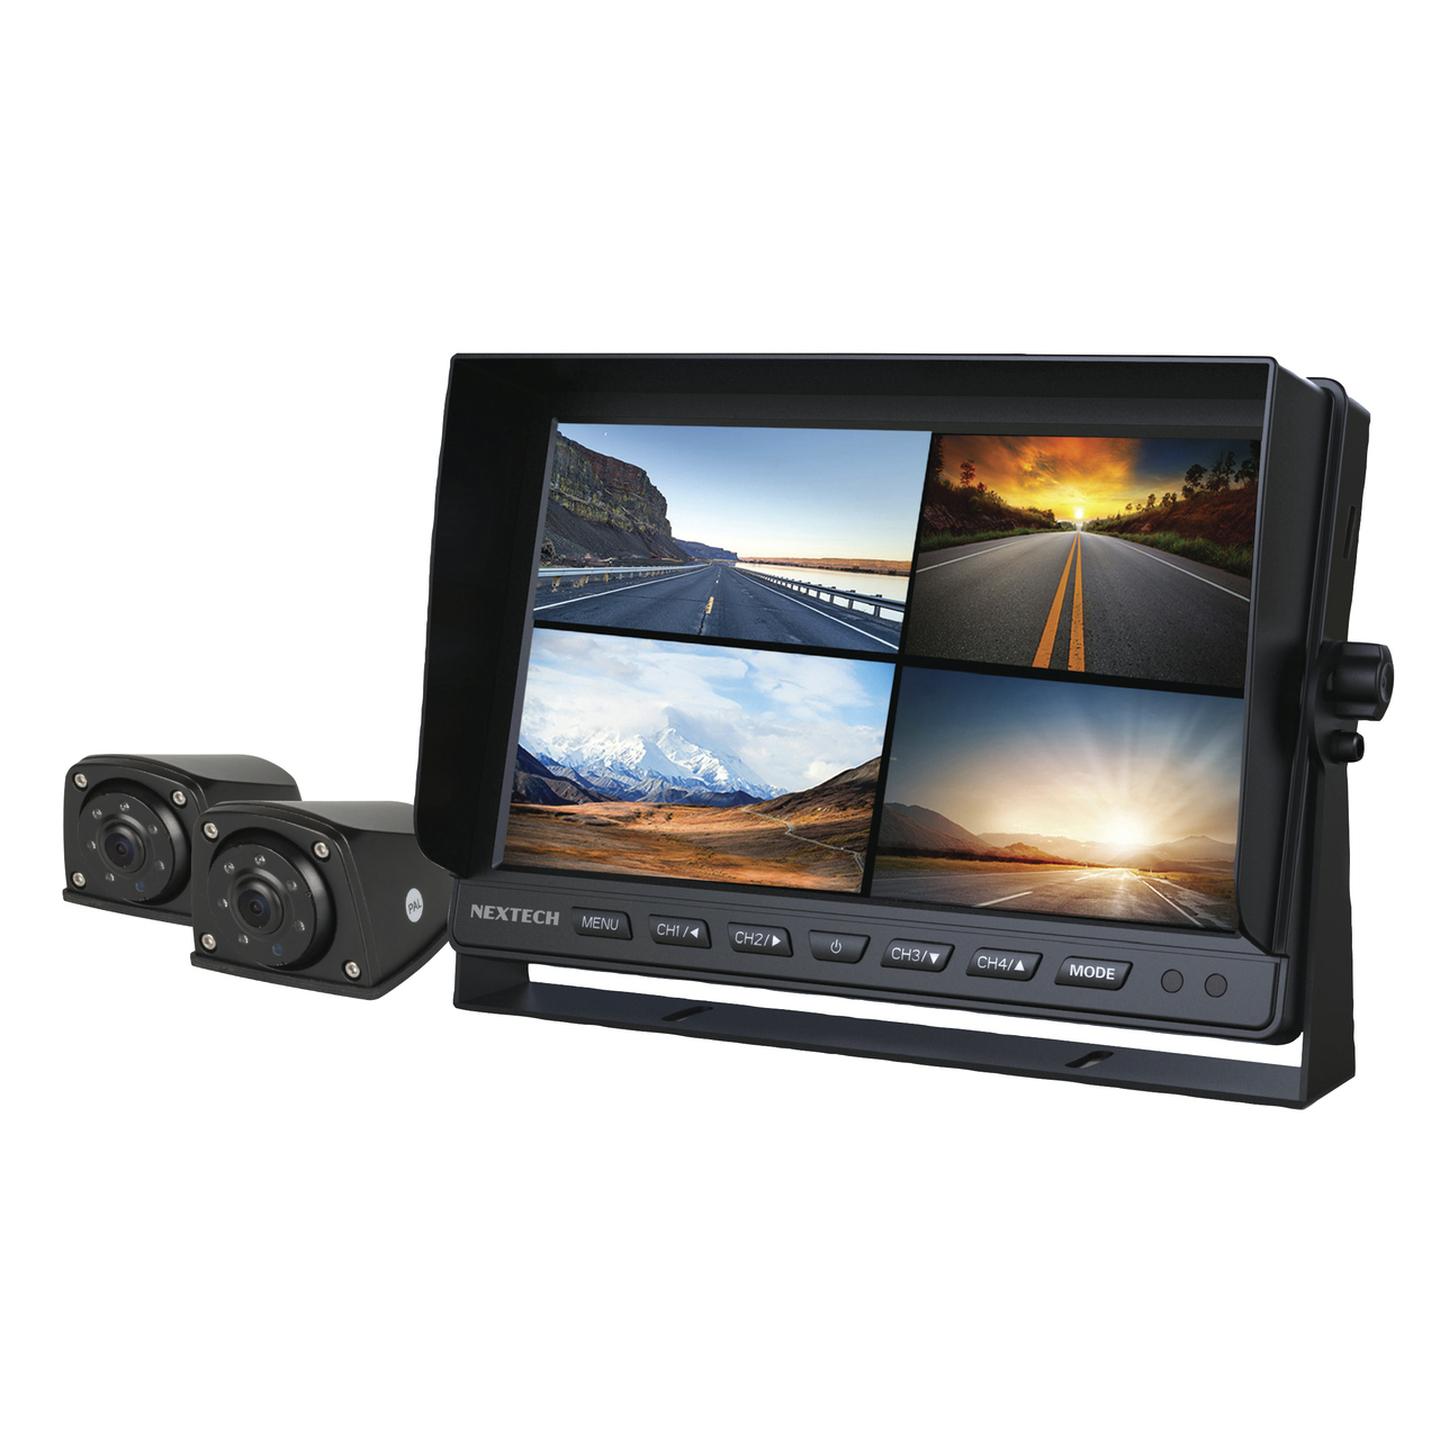 7 Inch 1080p LCD Monitor Kit with Built-In 4CH AHD Vehicle DVR and 2 x Wedge Style Vehicle Cameras